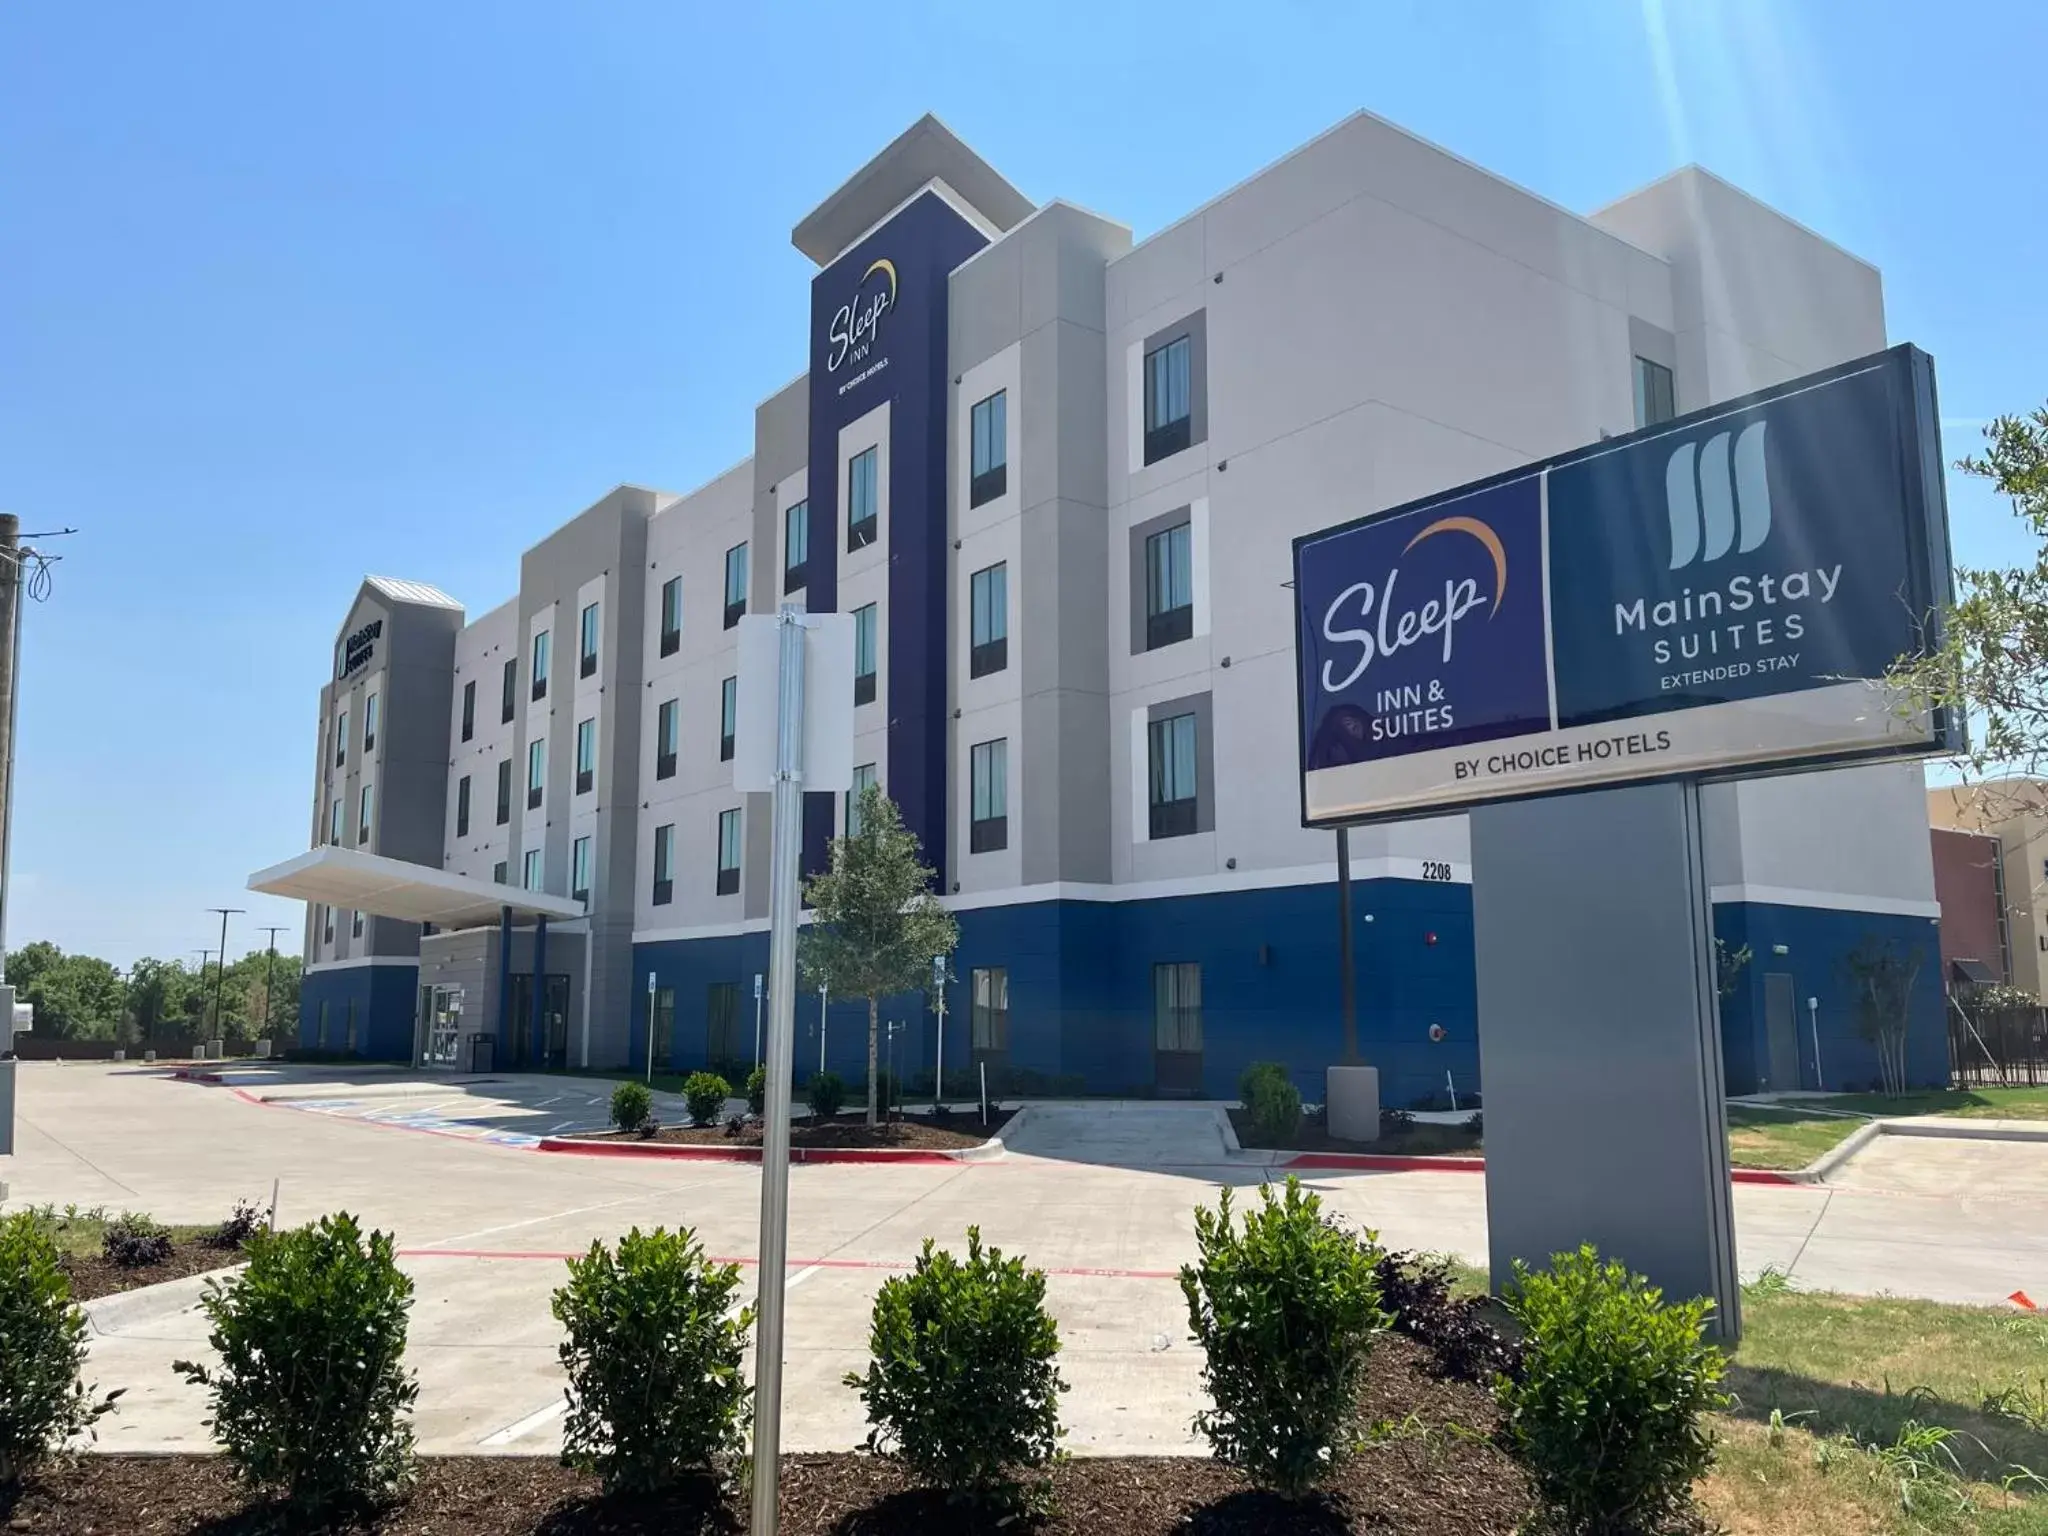 Property Building in MainStay Suites Dallas Northwest - Irving